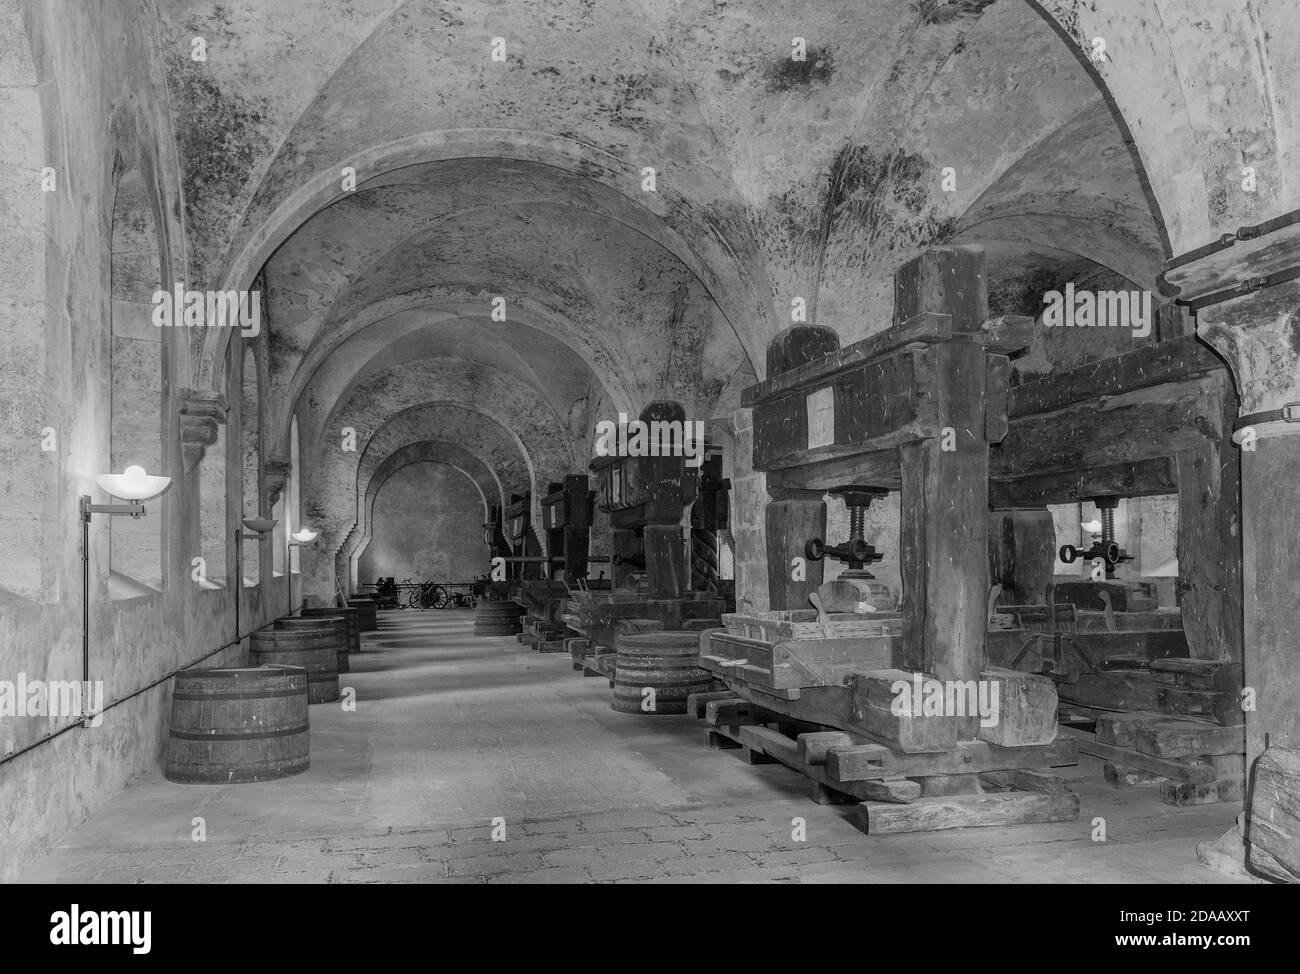 historical wine presses in the lay refectory of the Eberbach monastery, Hessen, Germany Stock Photo